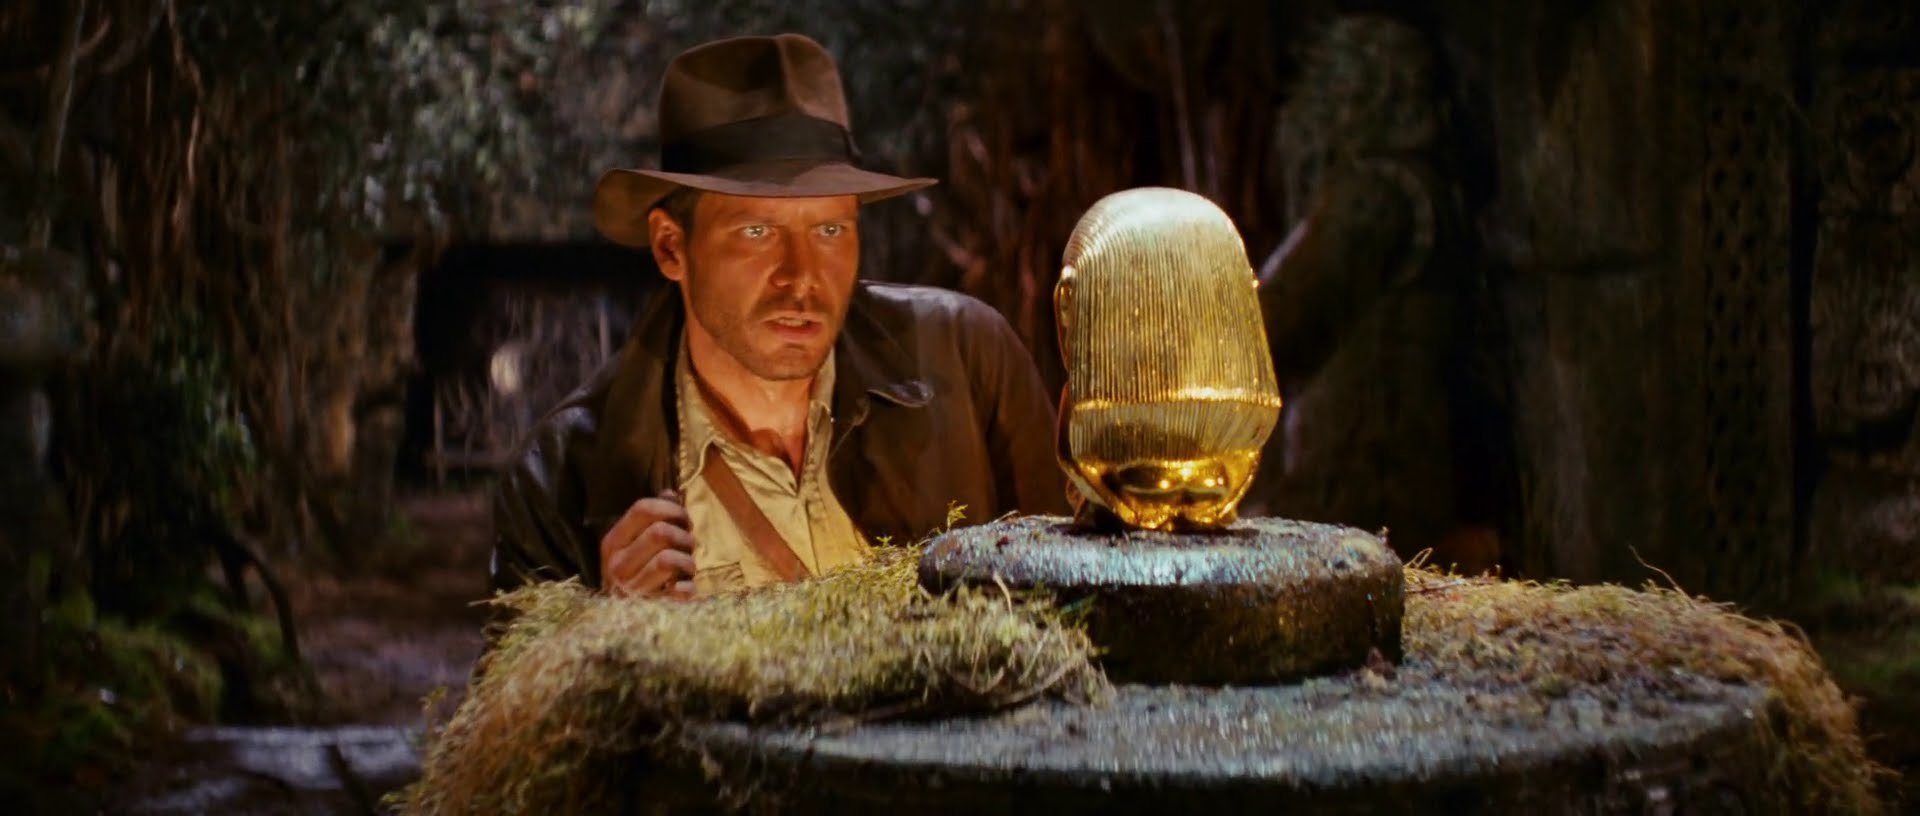 Indiana jones and the raiders of the lost ark scenes (118) фото